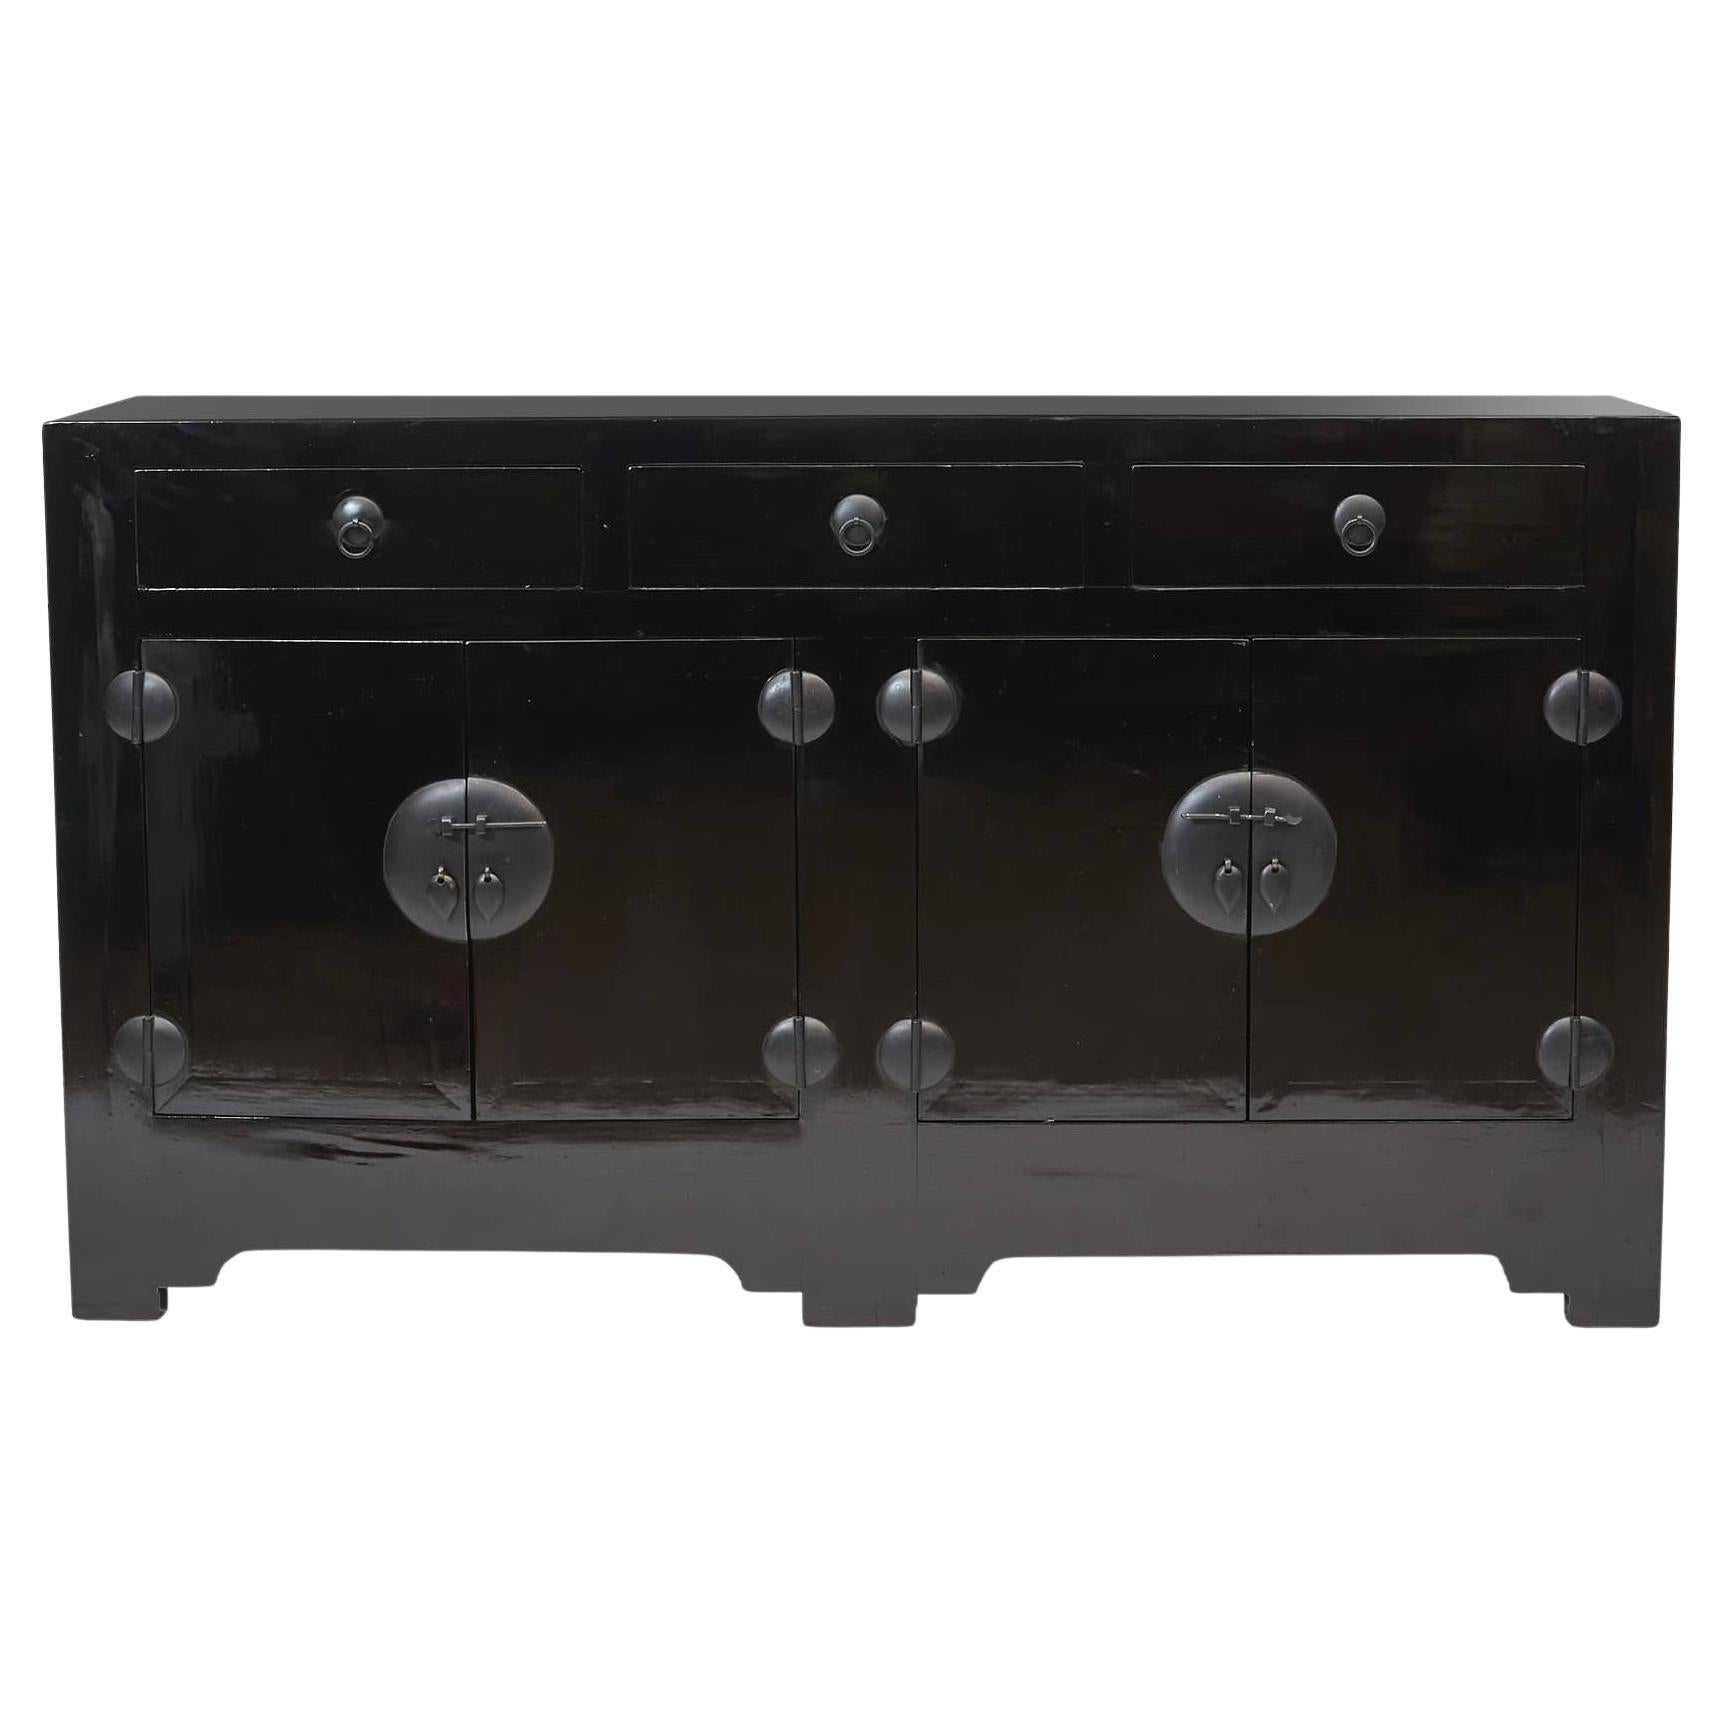 Black Lacquer Sideboard Cabinet from Tianjin, 1860 - 1880